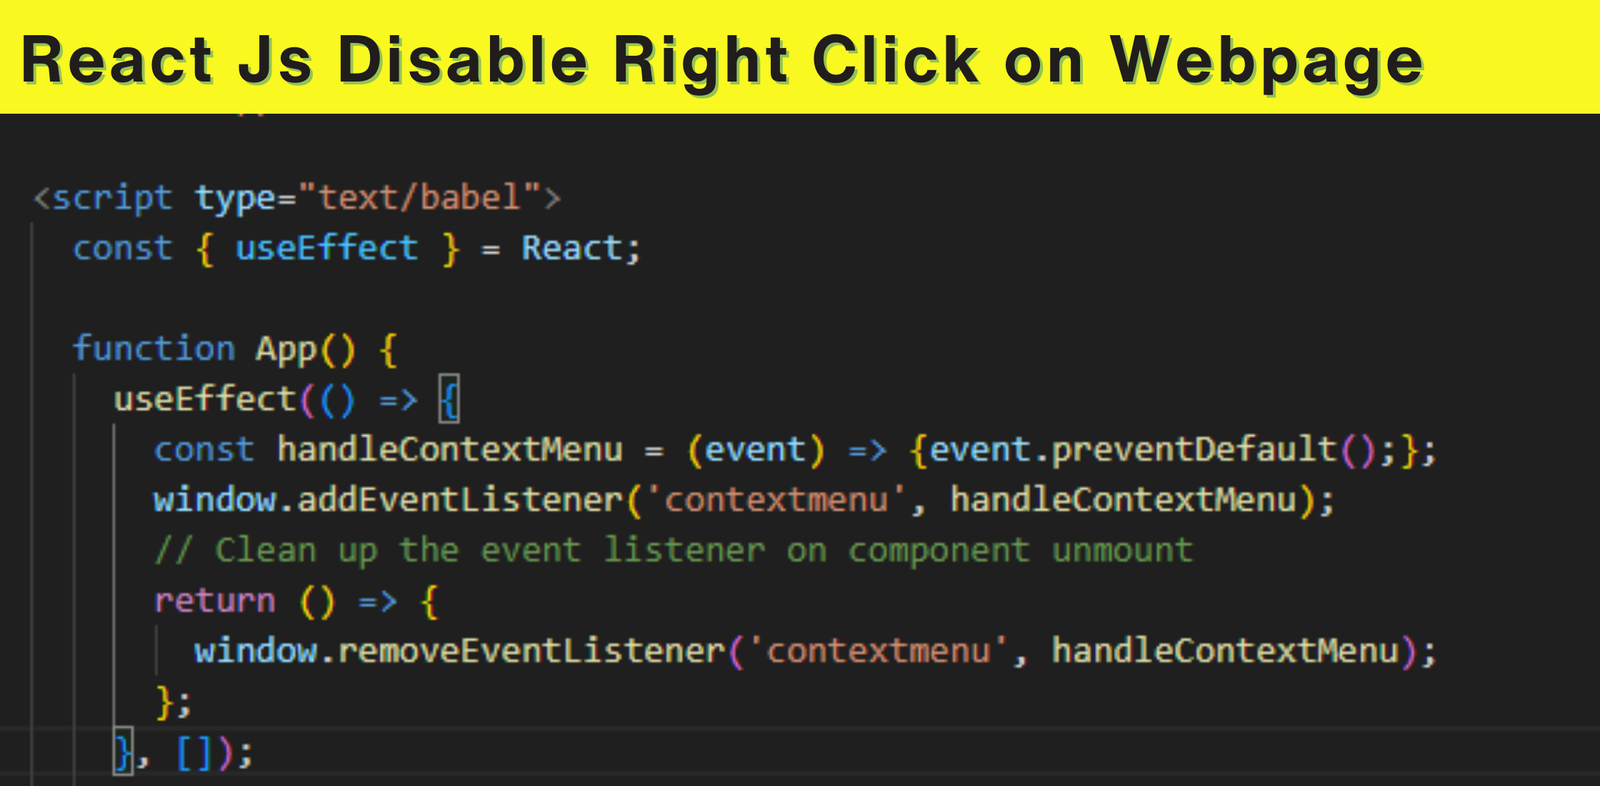 React Js Disable Right Click on Webpage